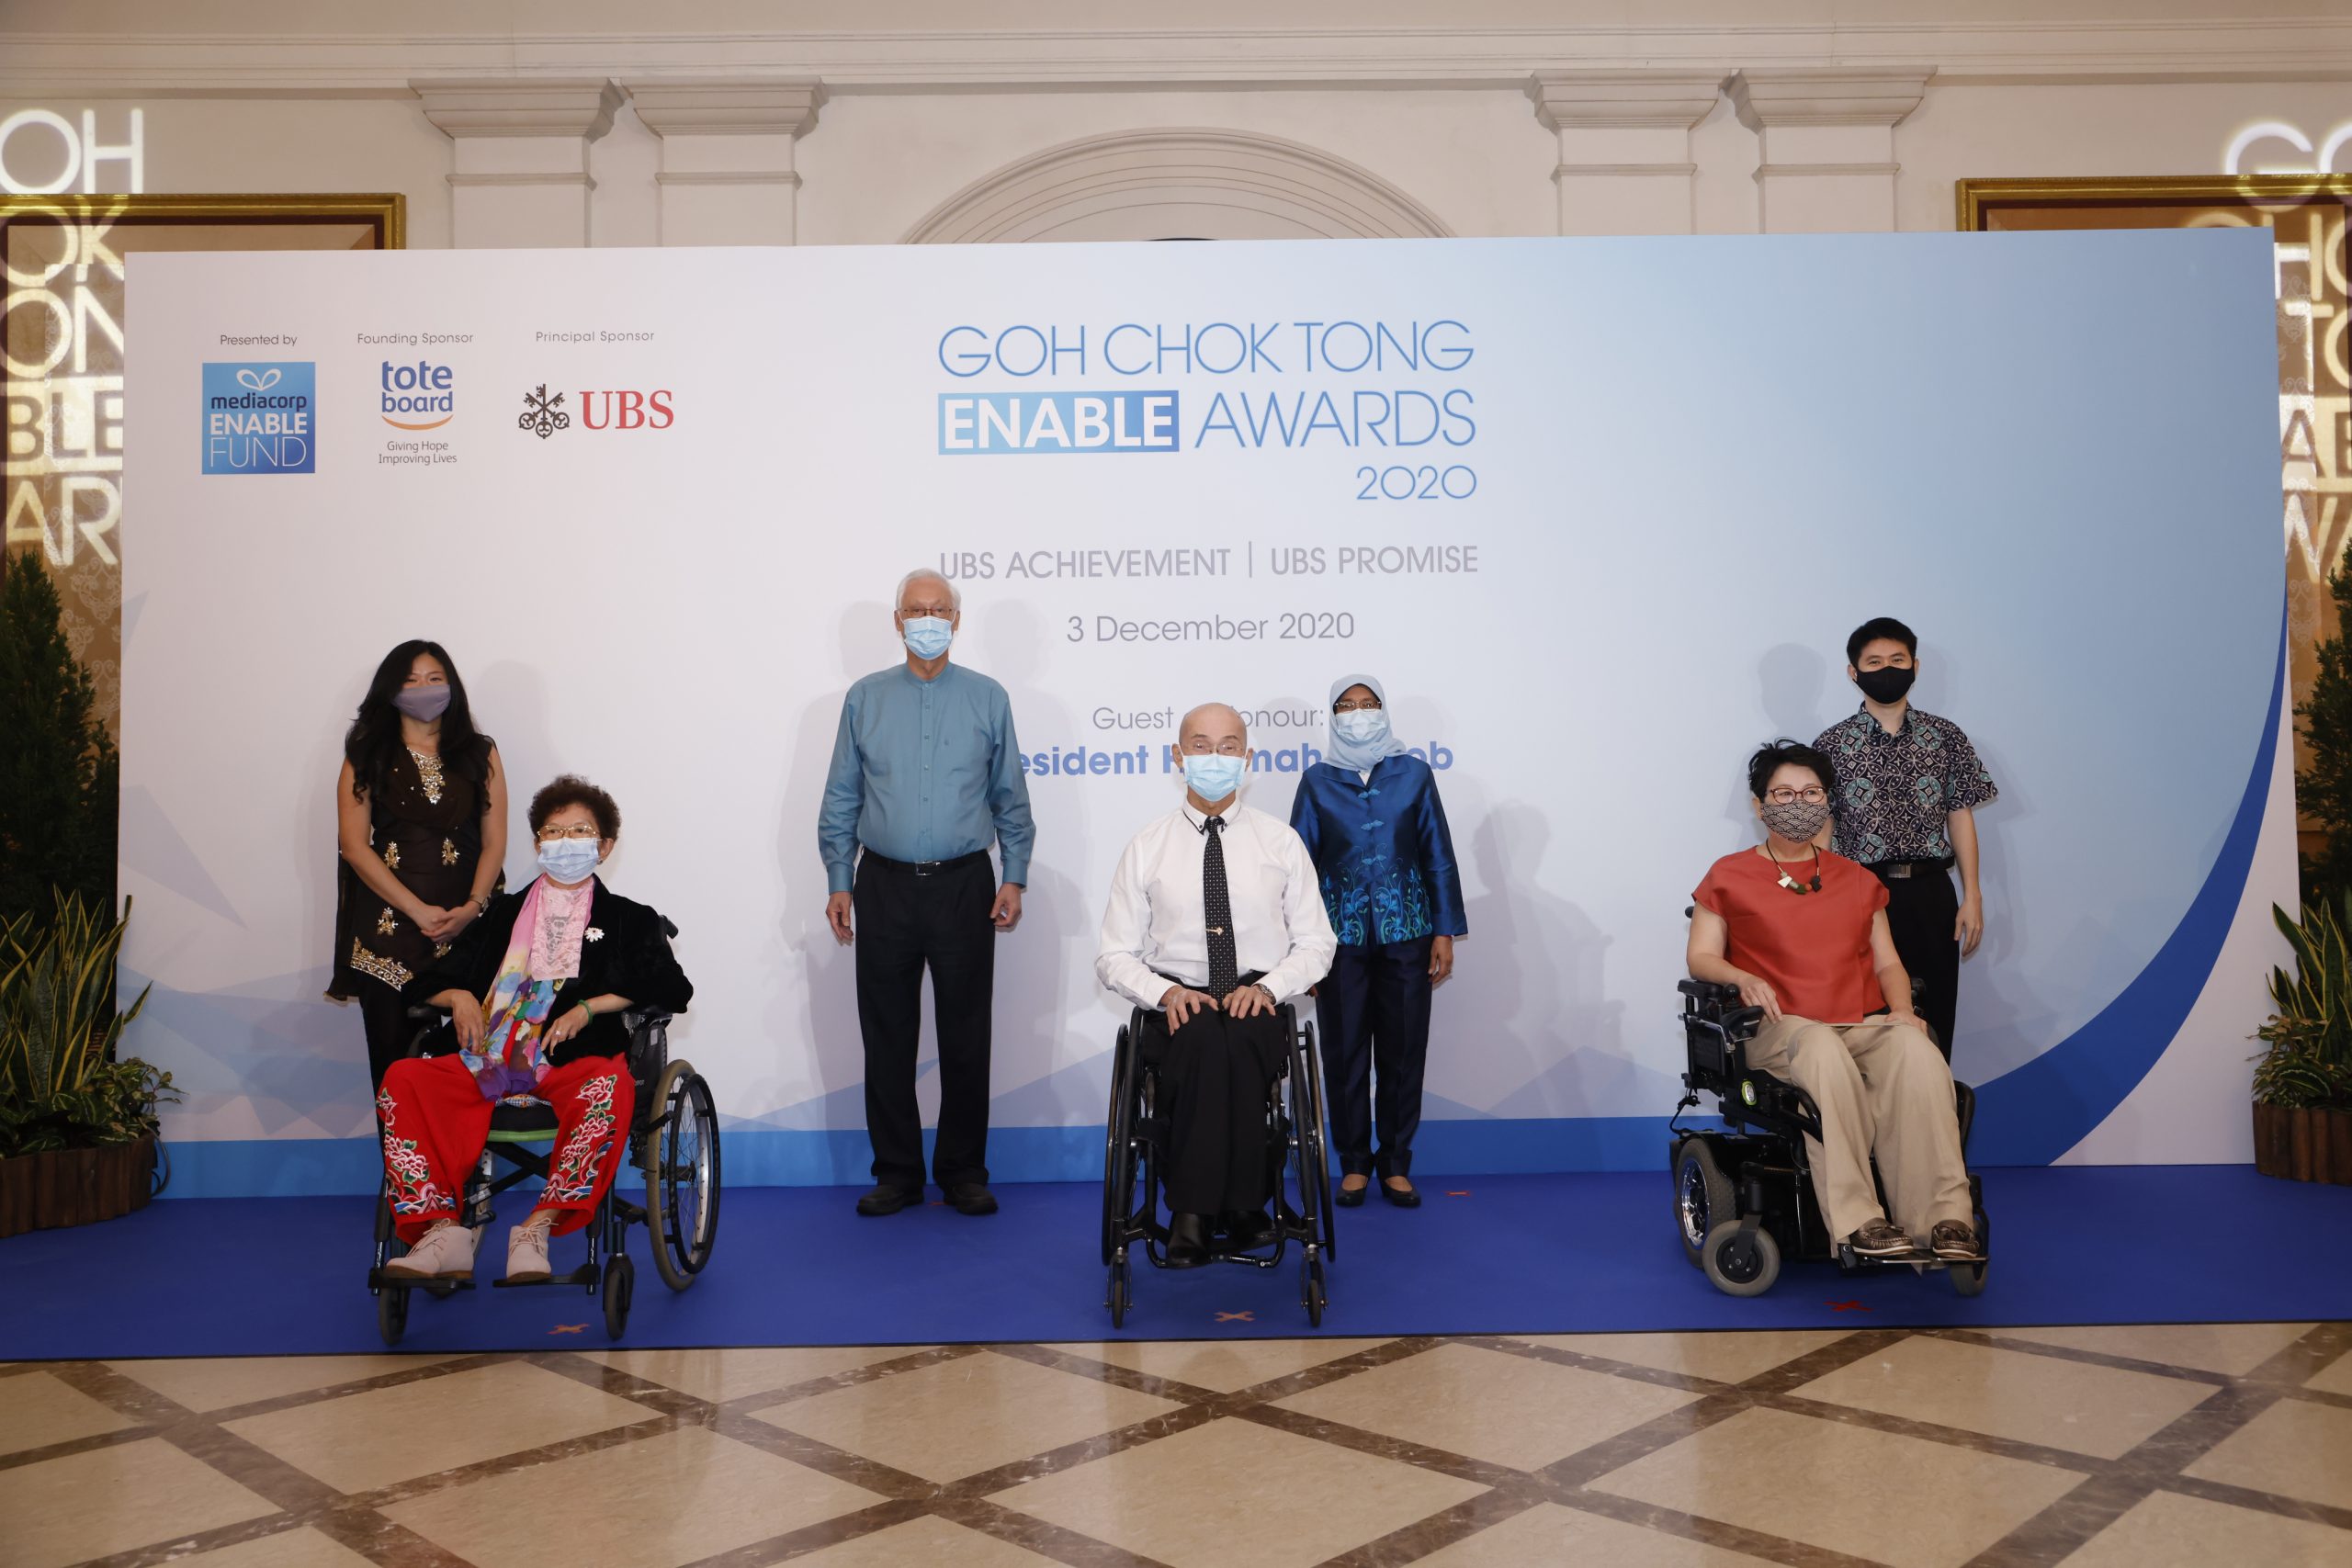 Photo shows Goh Chok Tong Enable Awards 2020 (UBS Achievement) awardees with President and ESM Goh Chok Tong.